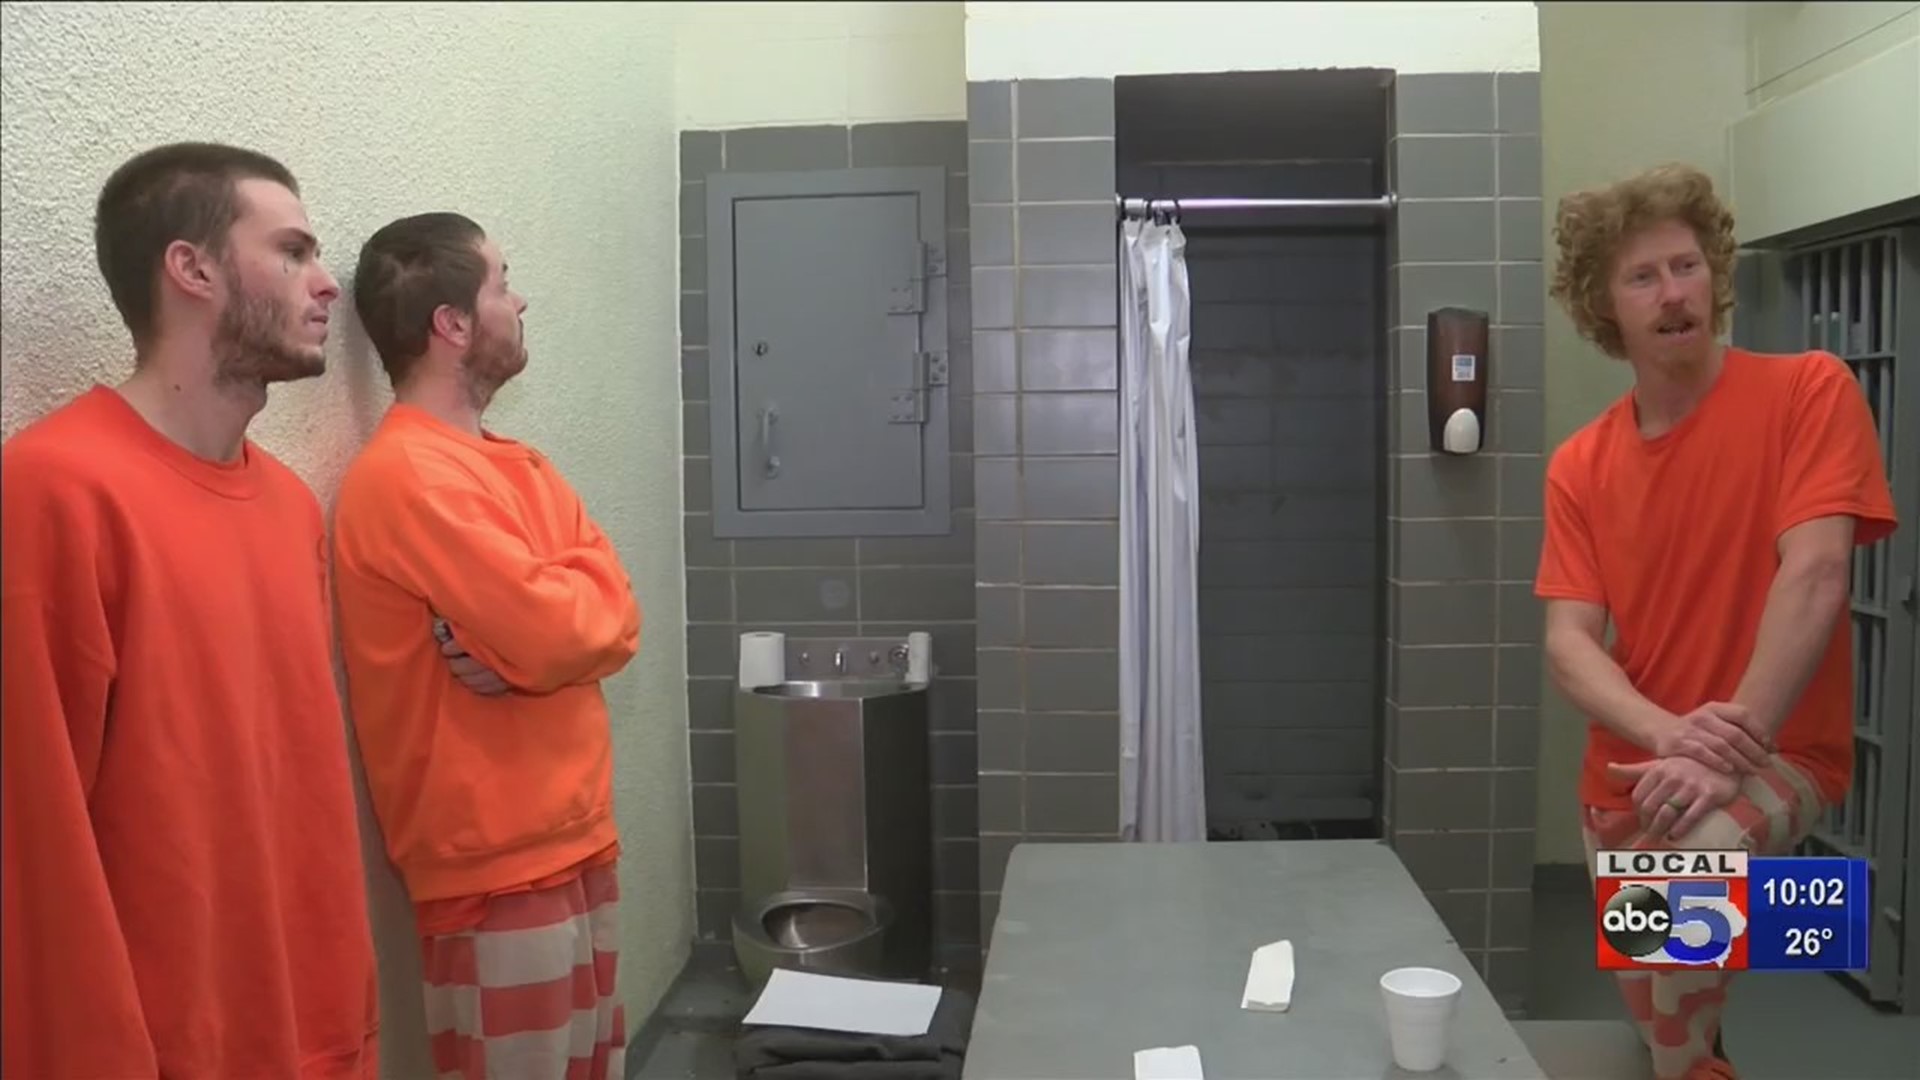 Inmates speak to Local 5 about conditions of Guthrie County Jail